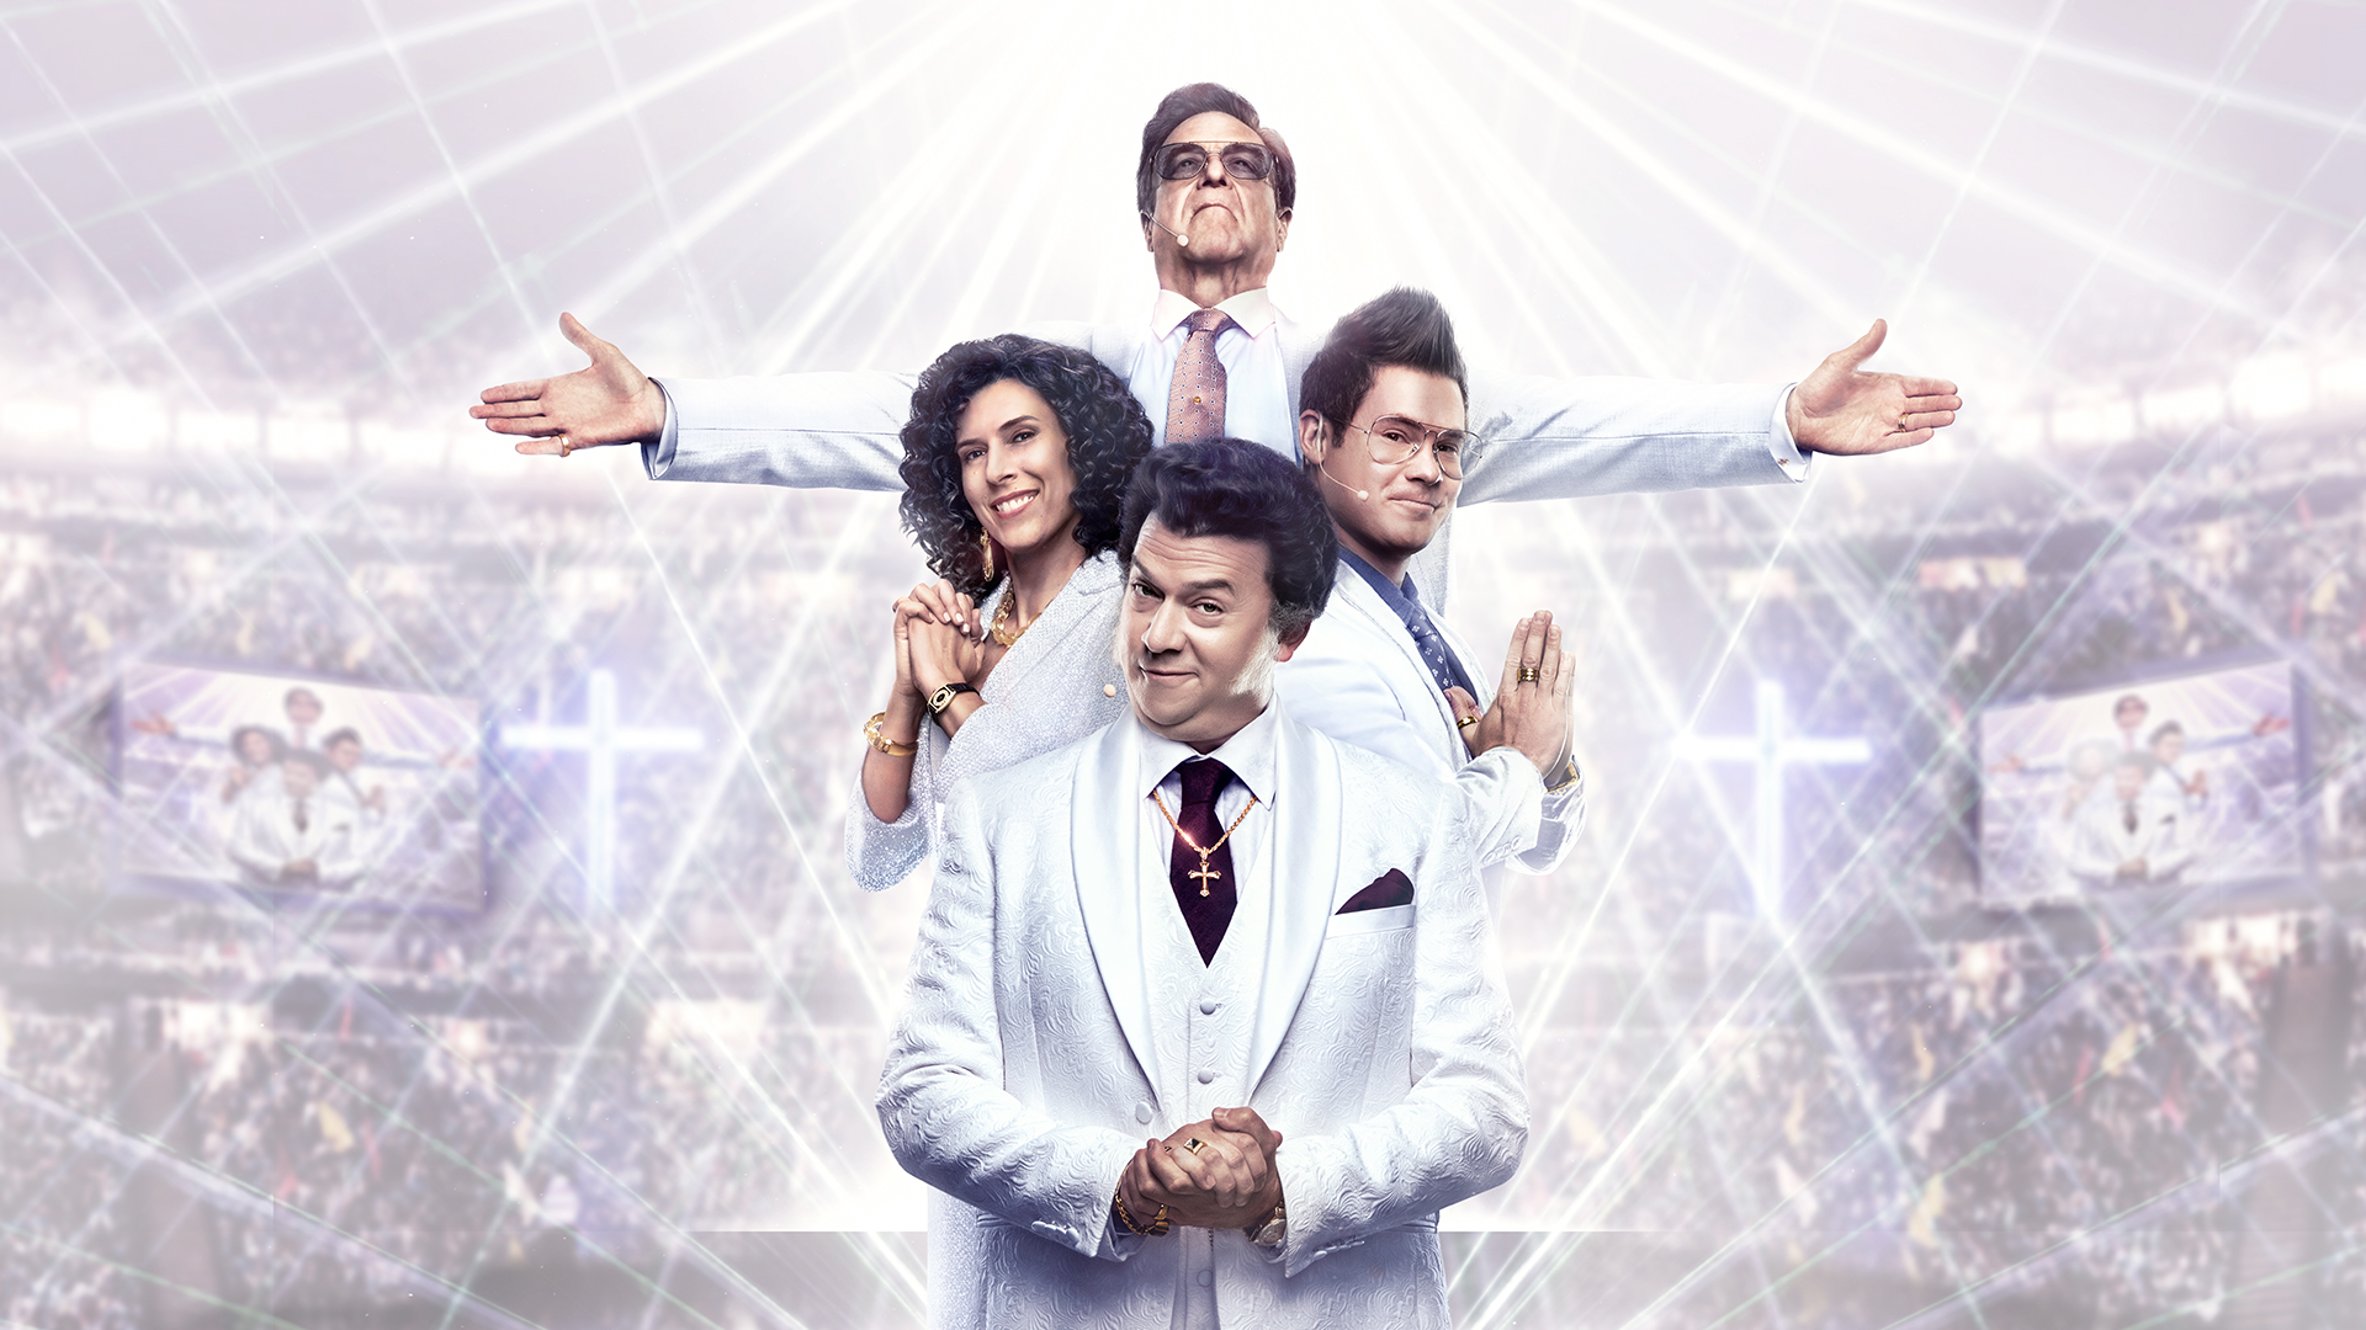 HBO’s “The Righteous Gemstones”